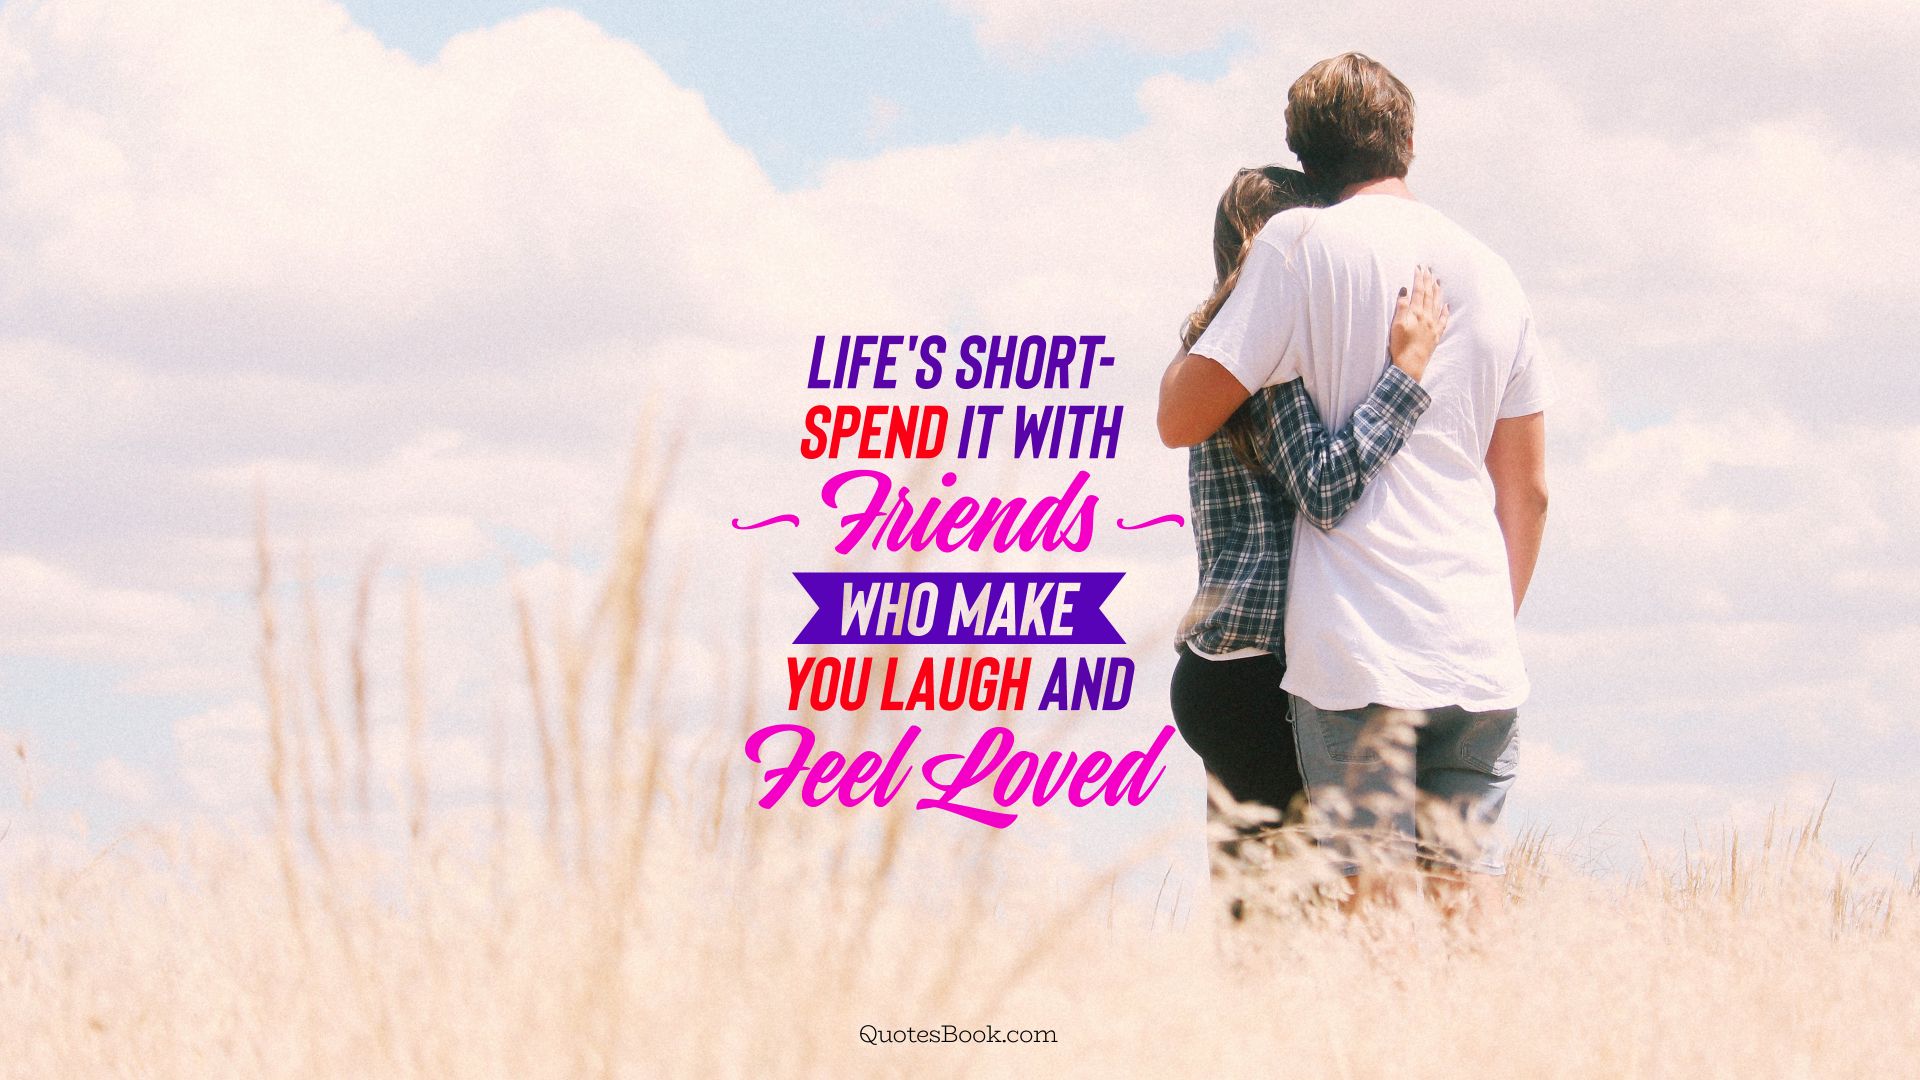 Life's short - spend it with friends who make you laugh and feel loved